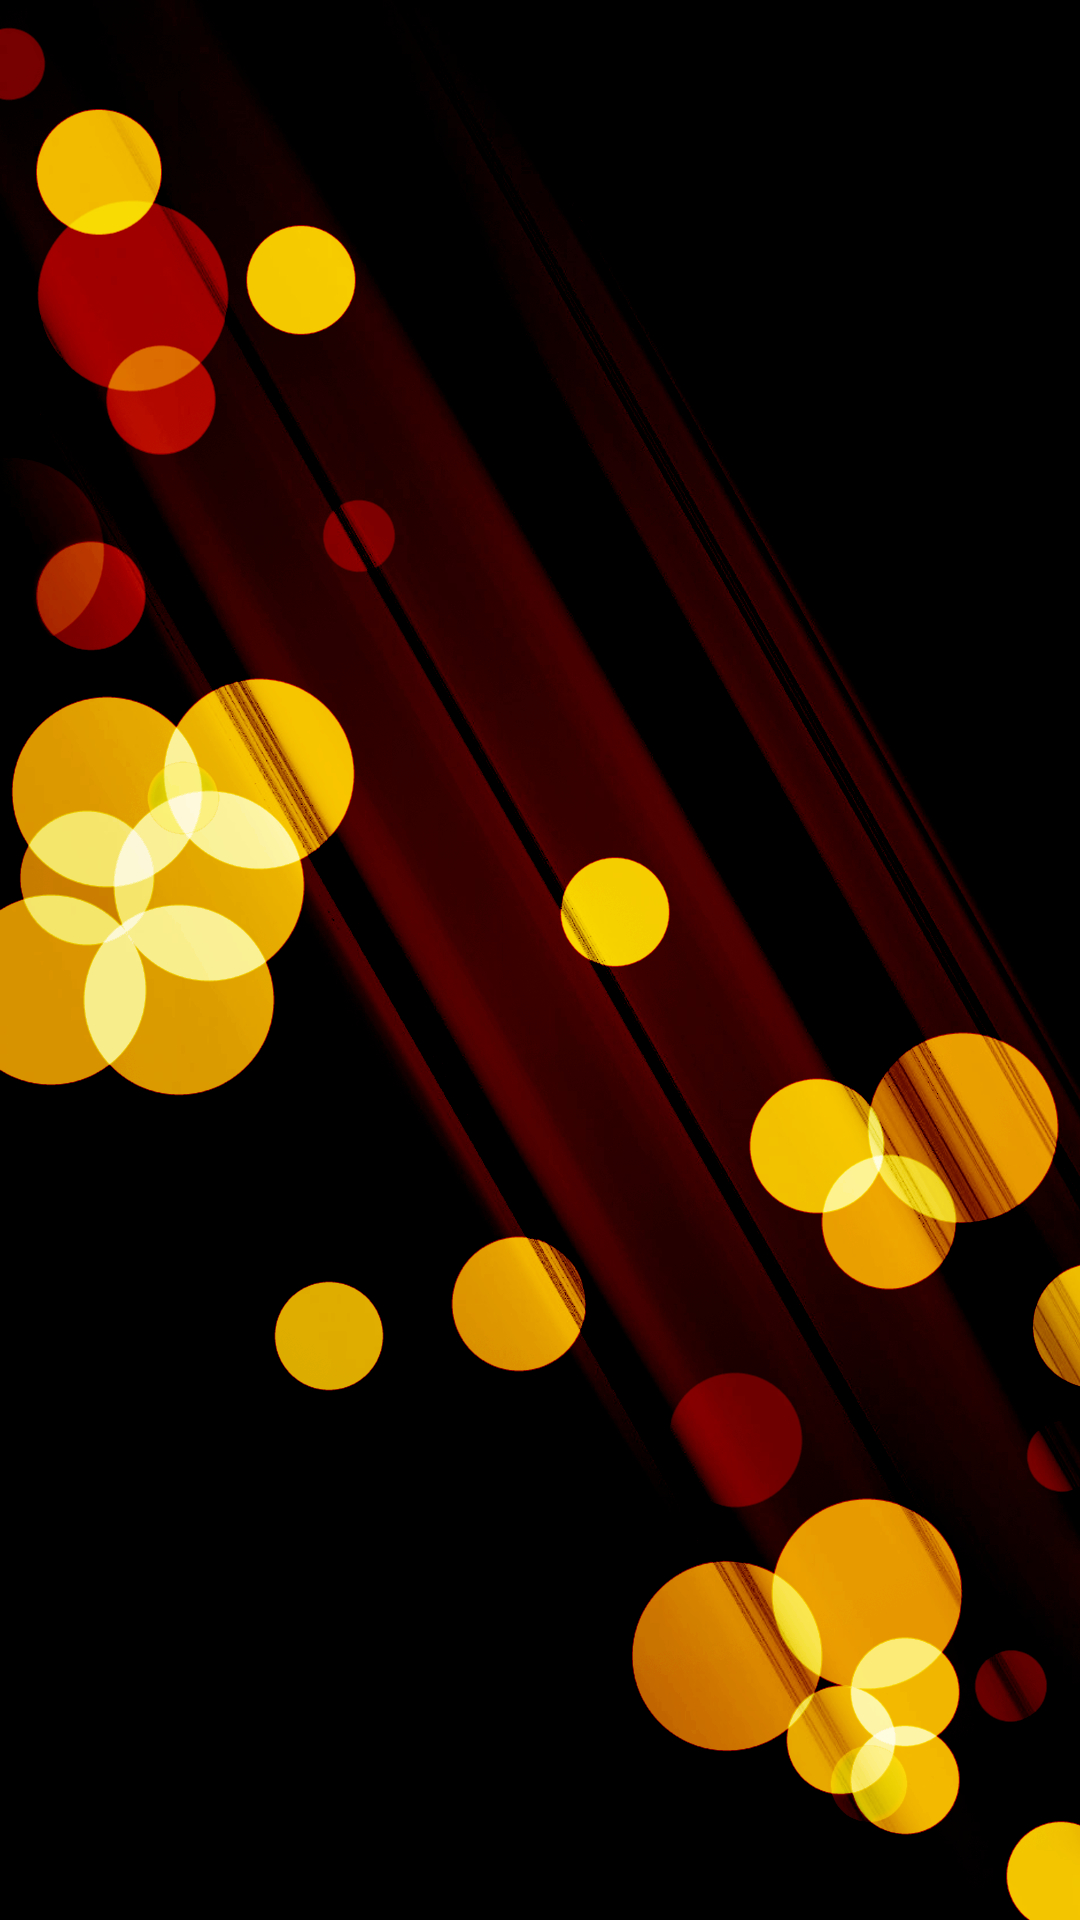 Galaxy S4 Wallpaper with abstract yellow lights in 1080x1920 resolution